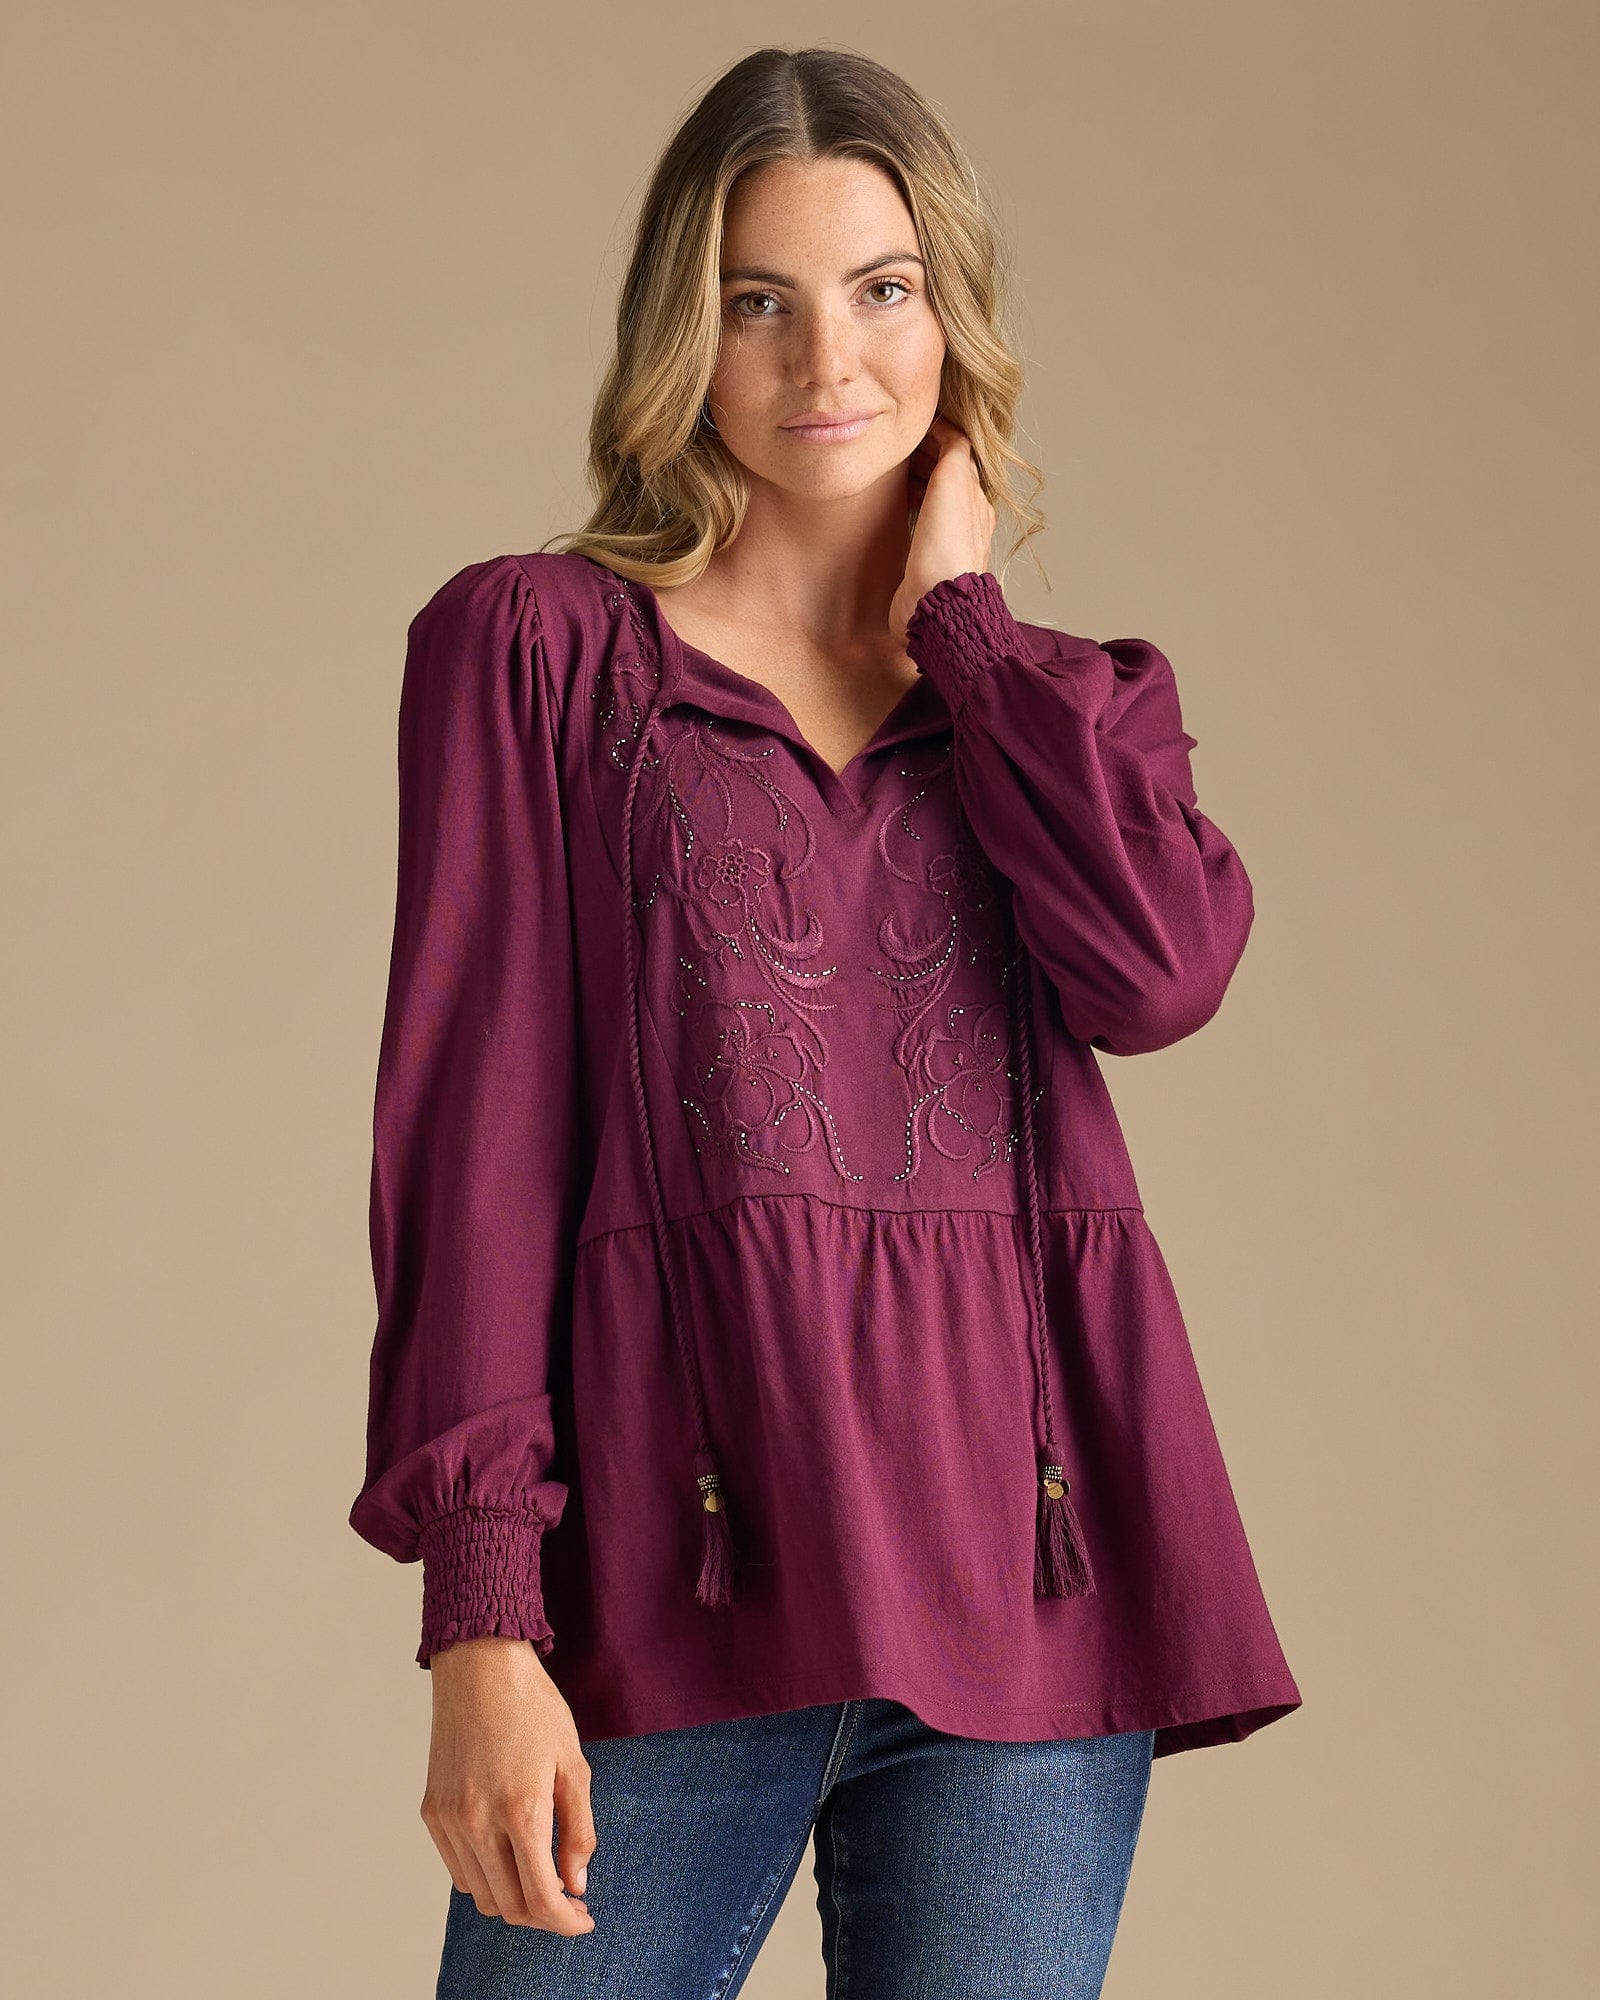 Woman in a purple blouse with peplum gathering and embroidered bib